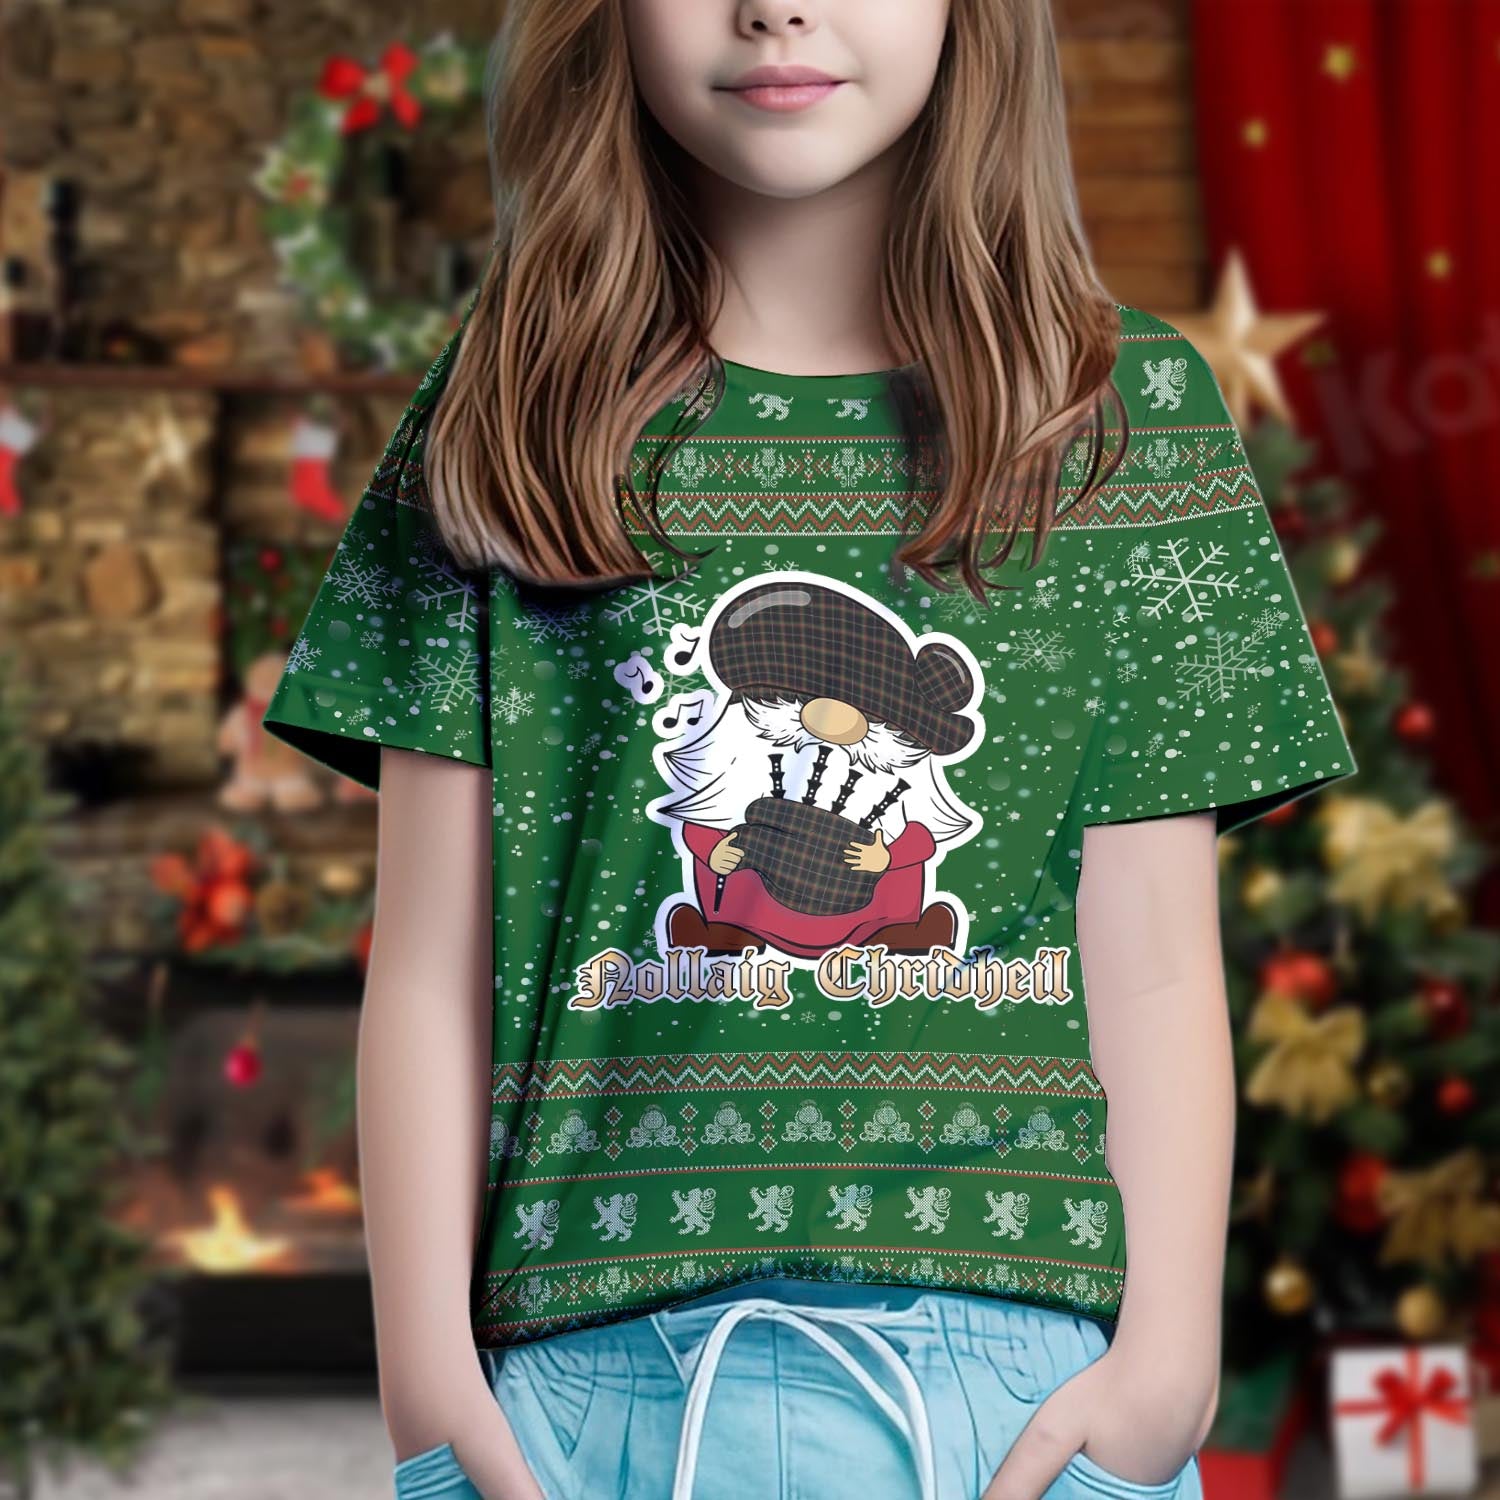 Stott Clan Christmas Family T-Shirt with Funny Gnome Playing Bagpipes Kid's Shirt Green - Tartanvibesclothing